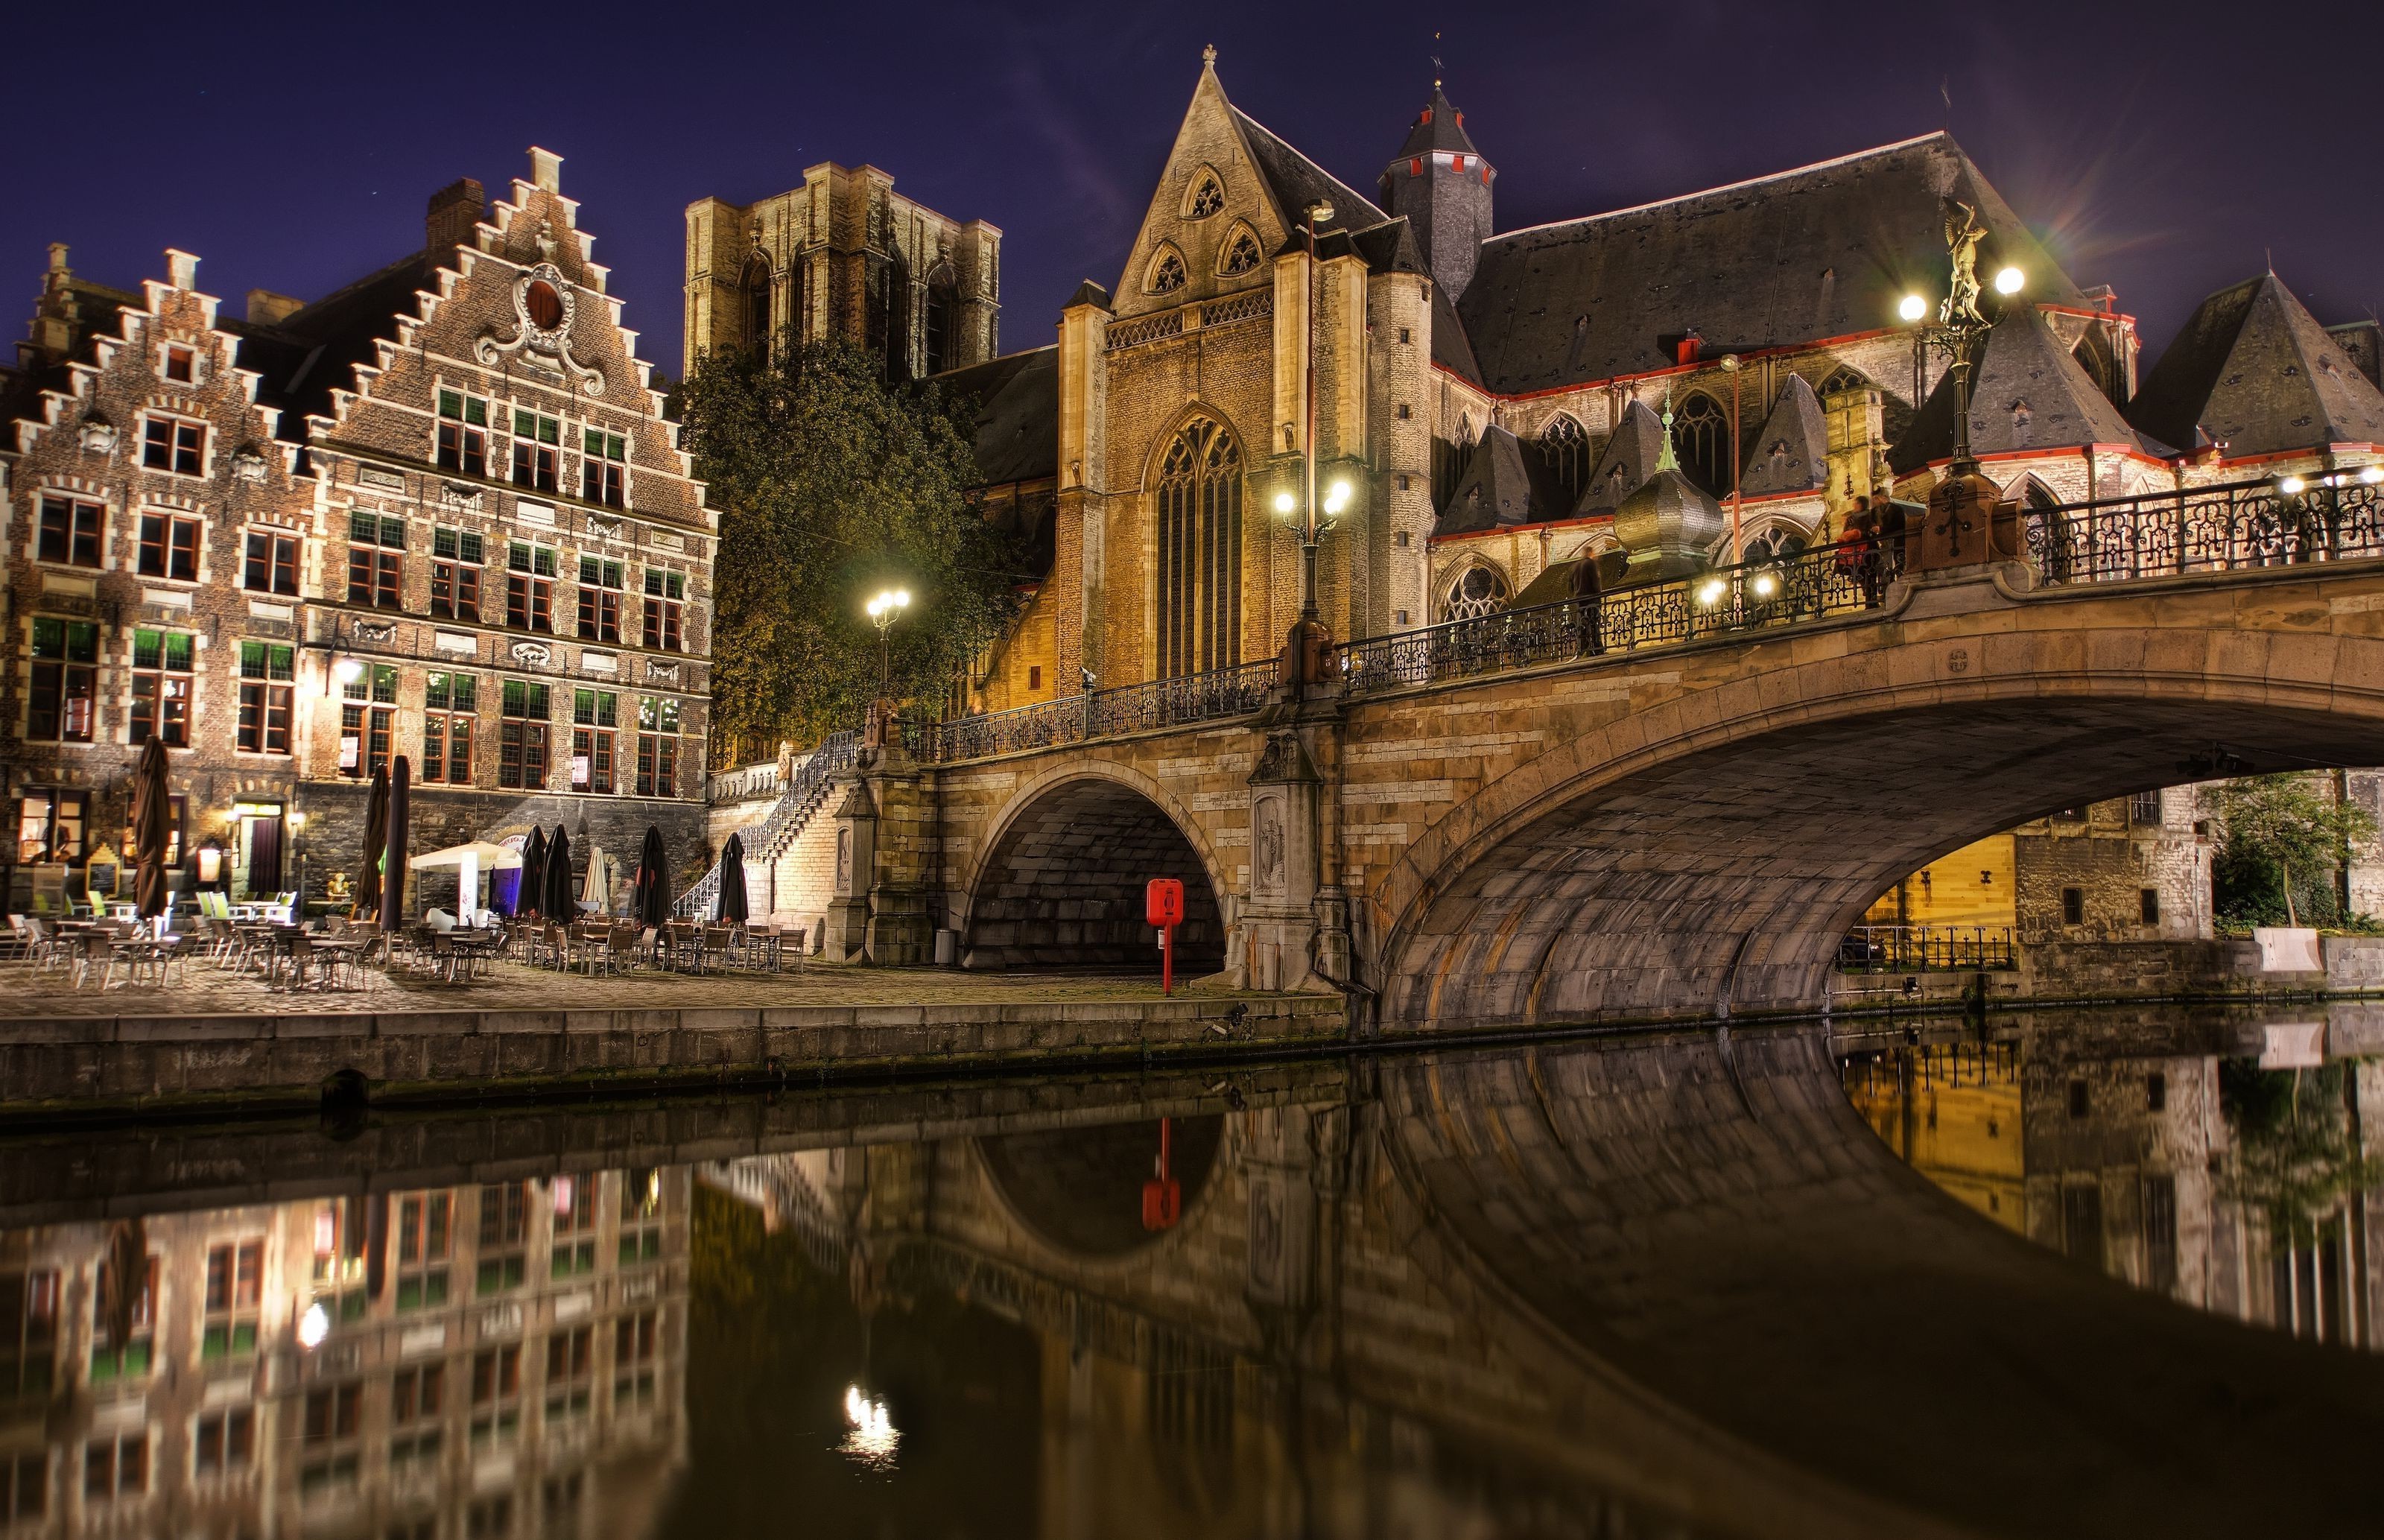 cityscape, Architecture, Night, Lights, Long Exposure, Building, Bridge, River, Old Building, Reflection, Church, Bruges Wallpaper